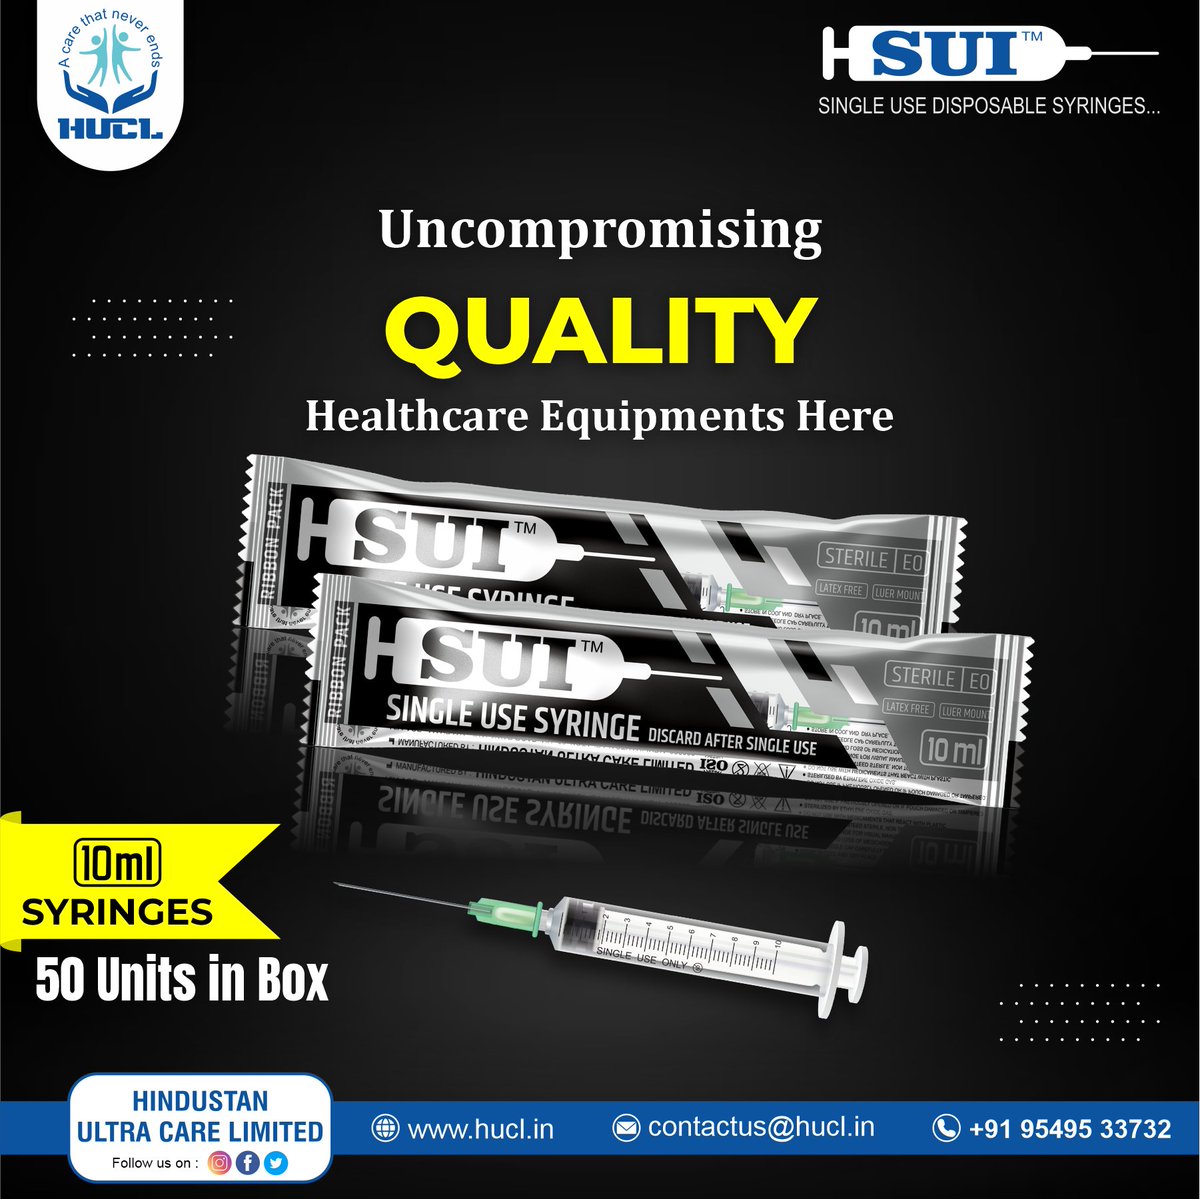 Hindustan Ultra Care Limited
With outstanding build quality and superior needle performance, HUCL deliver medication with ease to provide optimum comfort for patients.
https://t.co/CKncZlaHz2
https://t.co/dmdbHVng4K
https://t.co/eW0xqCgs37

#HealthcareProfessionals #Healthcare https://t.co/SujJV5ri6V